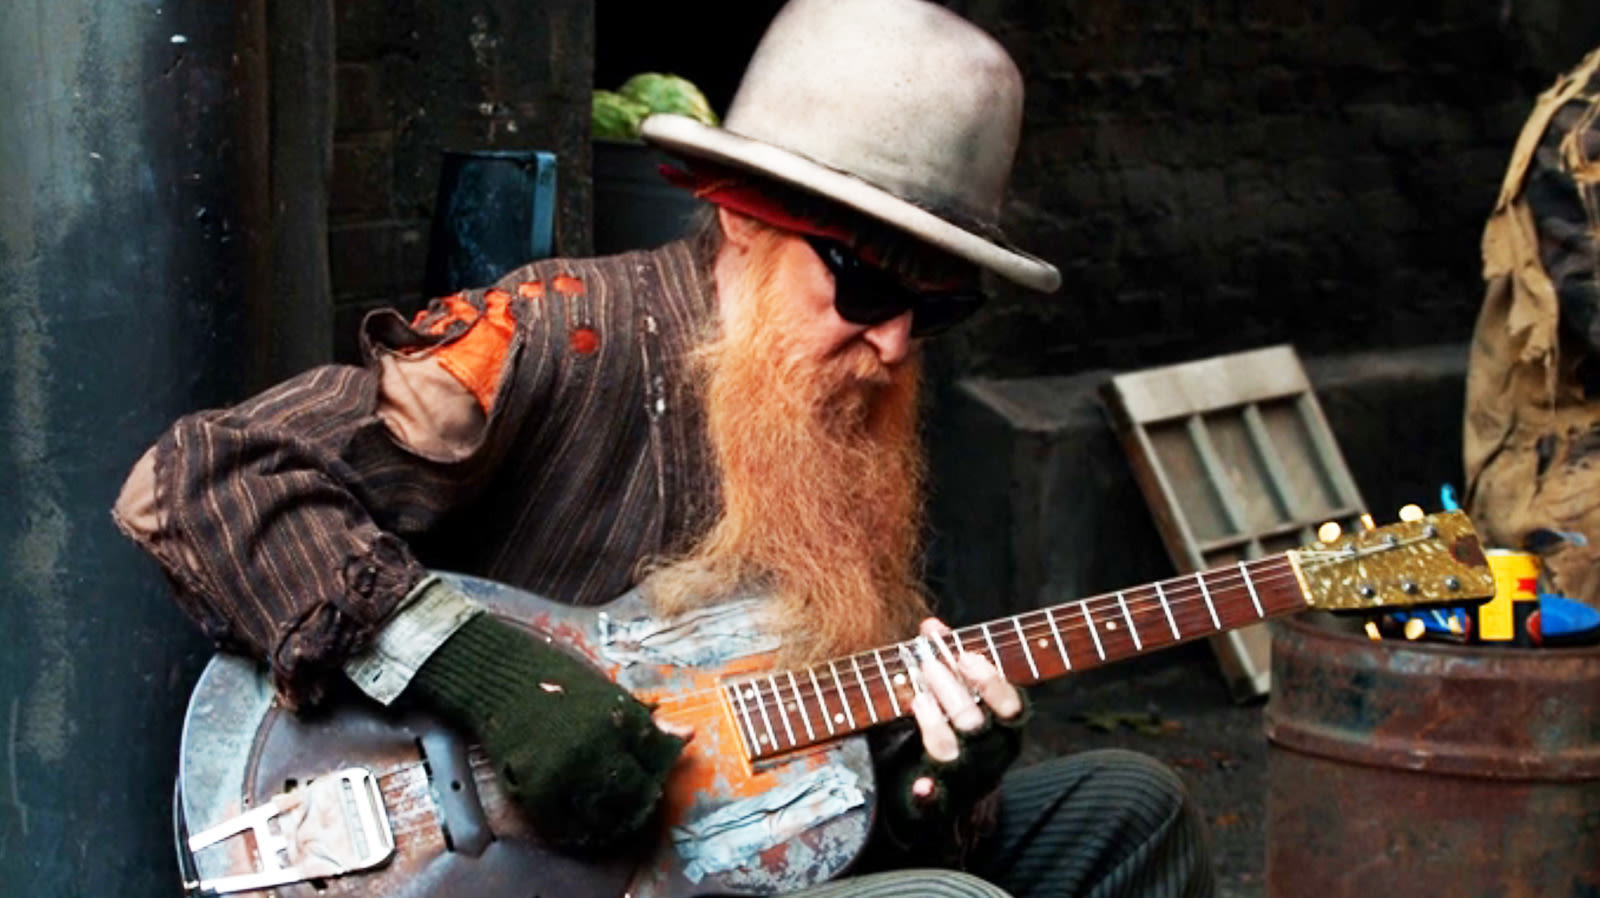 The Hilarious Misbelief About Billy Gibbons' Bones Character - SlashFilm